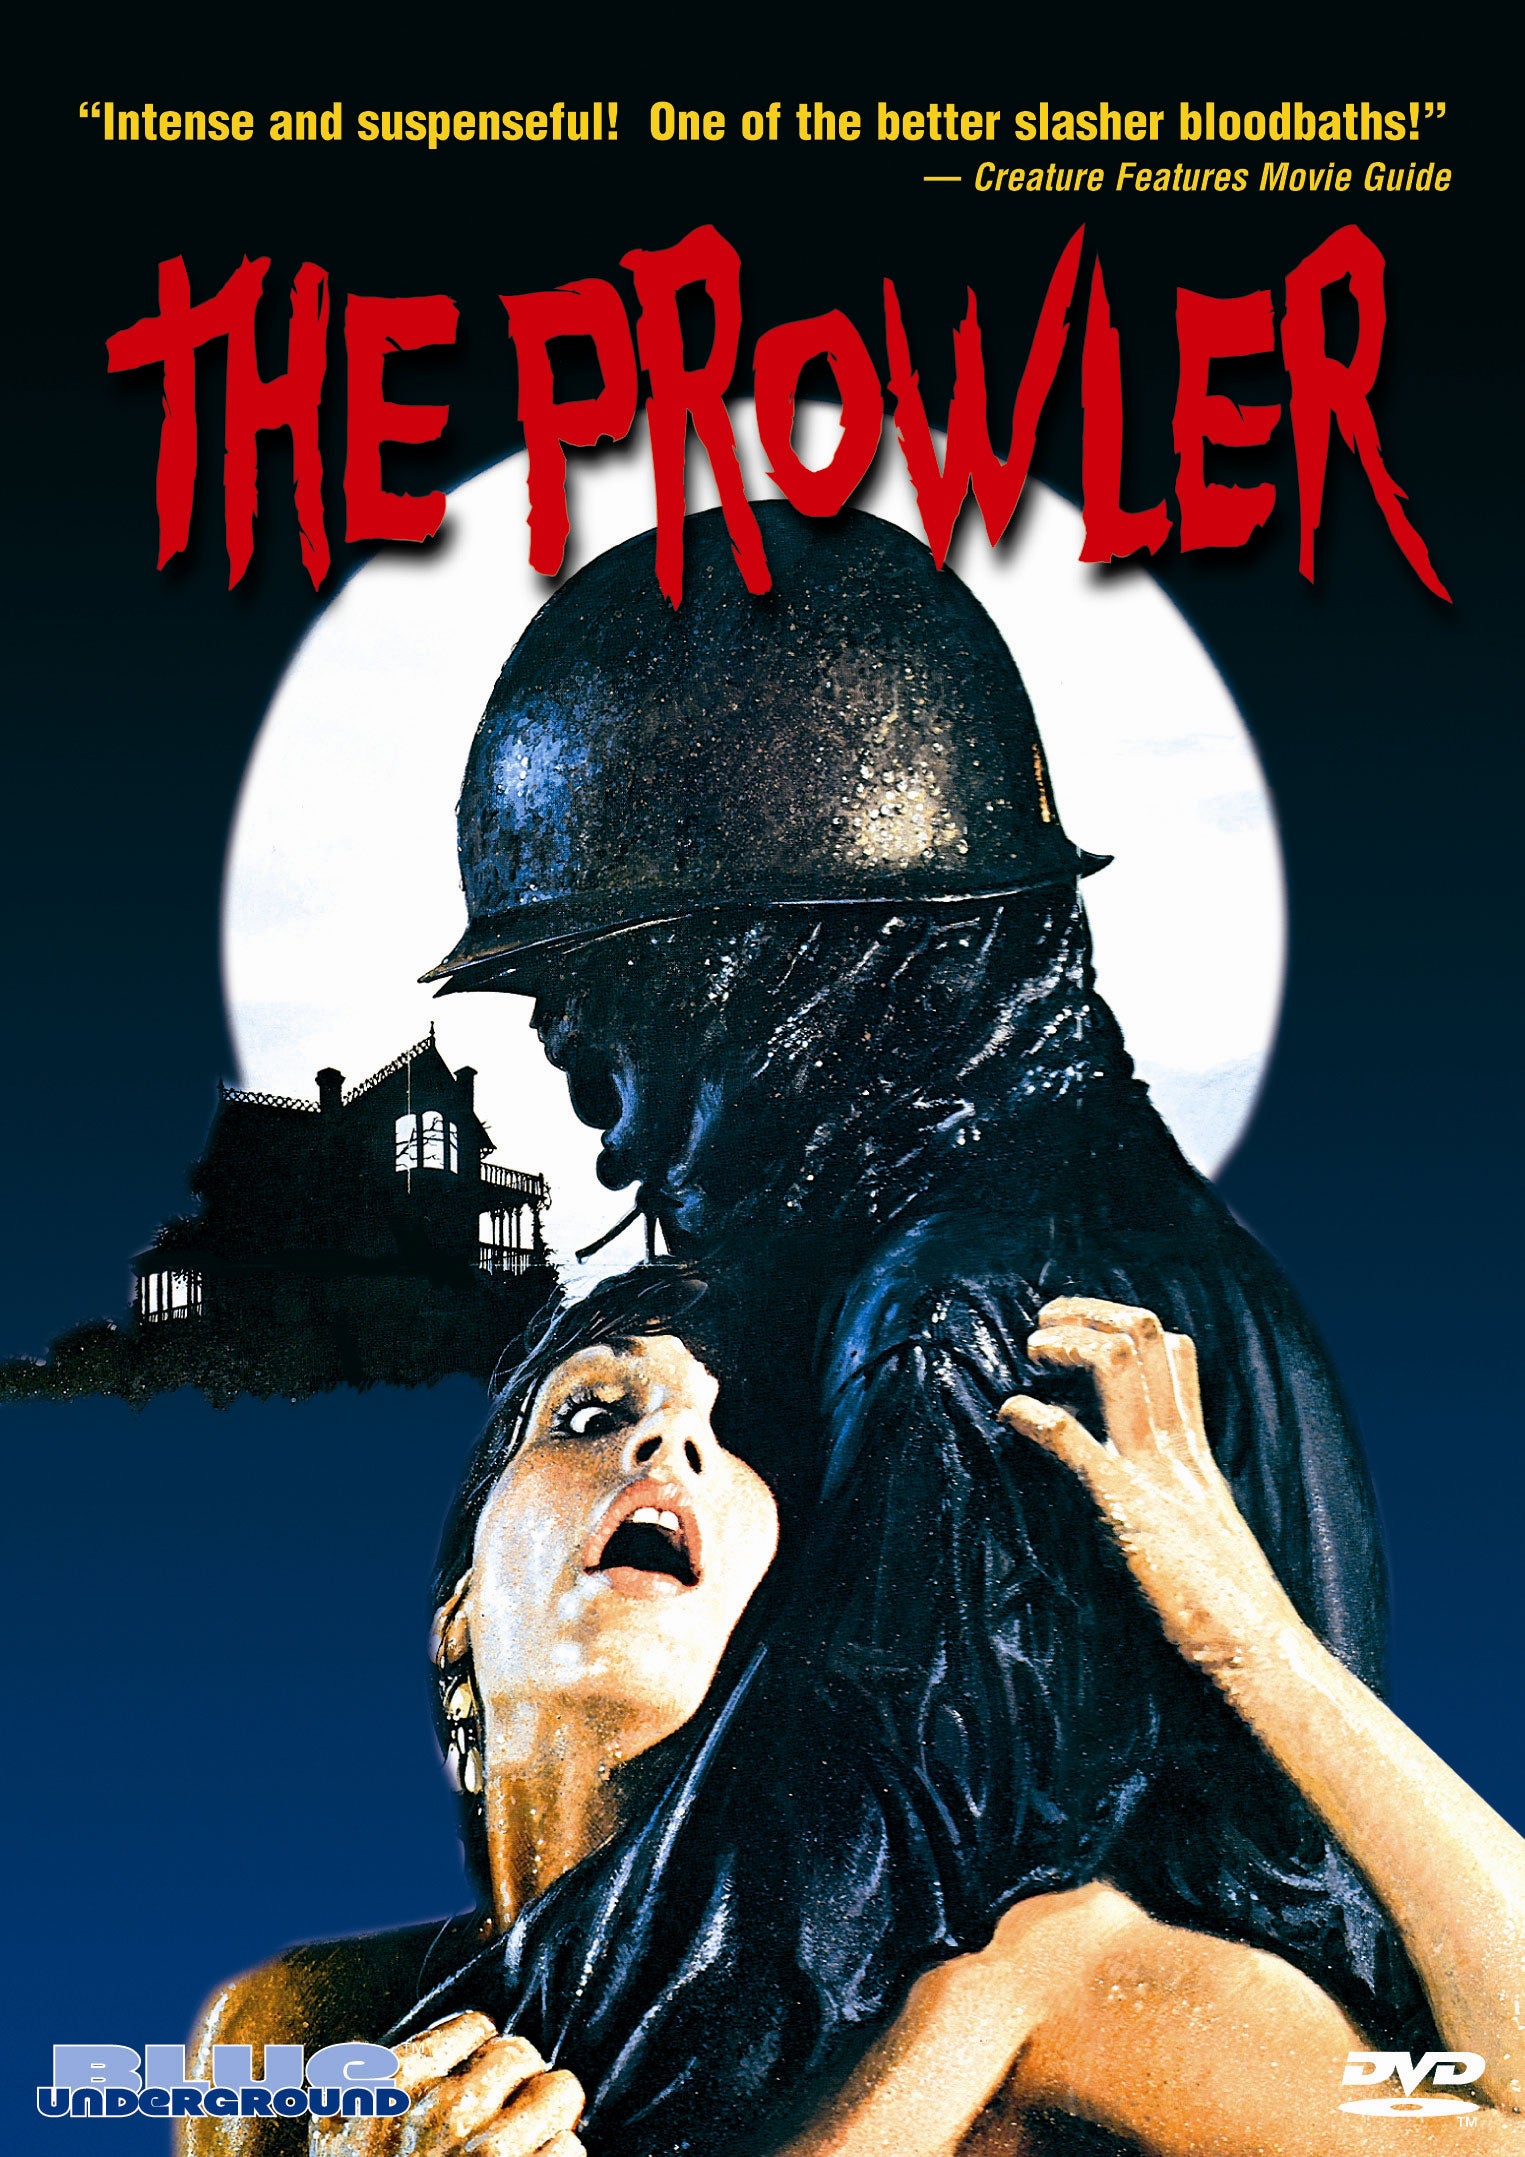 THE PROWLER DVD